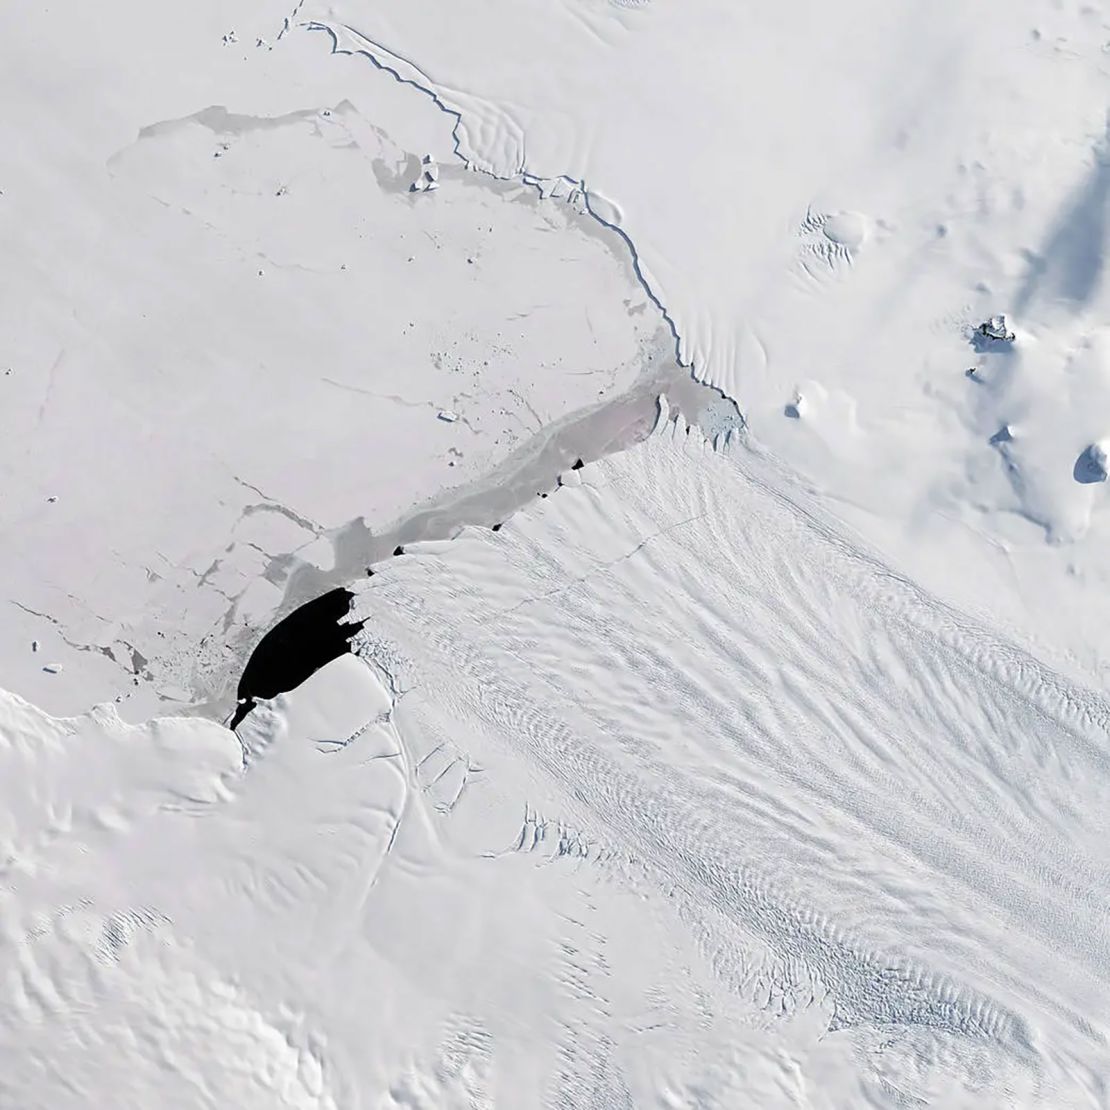 A 2017 photo shows a new iceberg calved from Pine Island Glacier, one of the main outlets where ice from the West Antarctic Ice Sheet flows into the ocean.